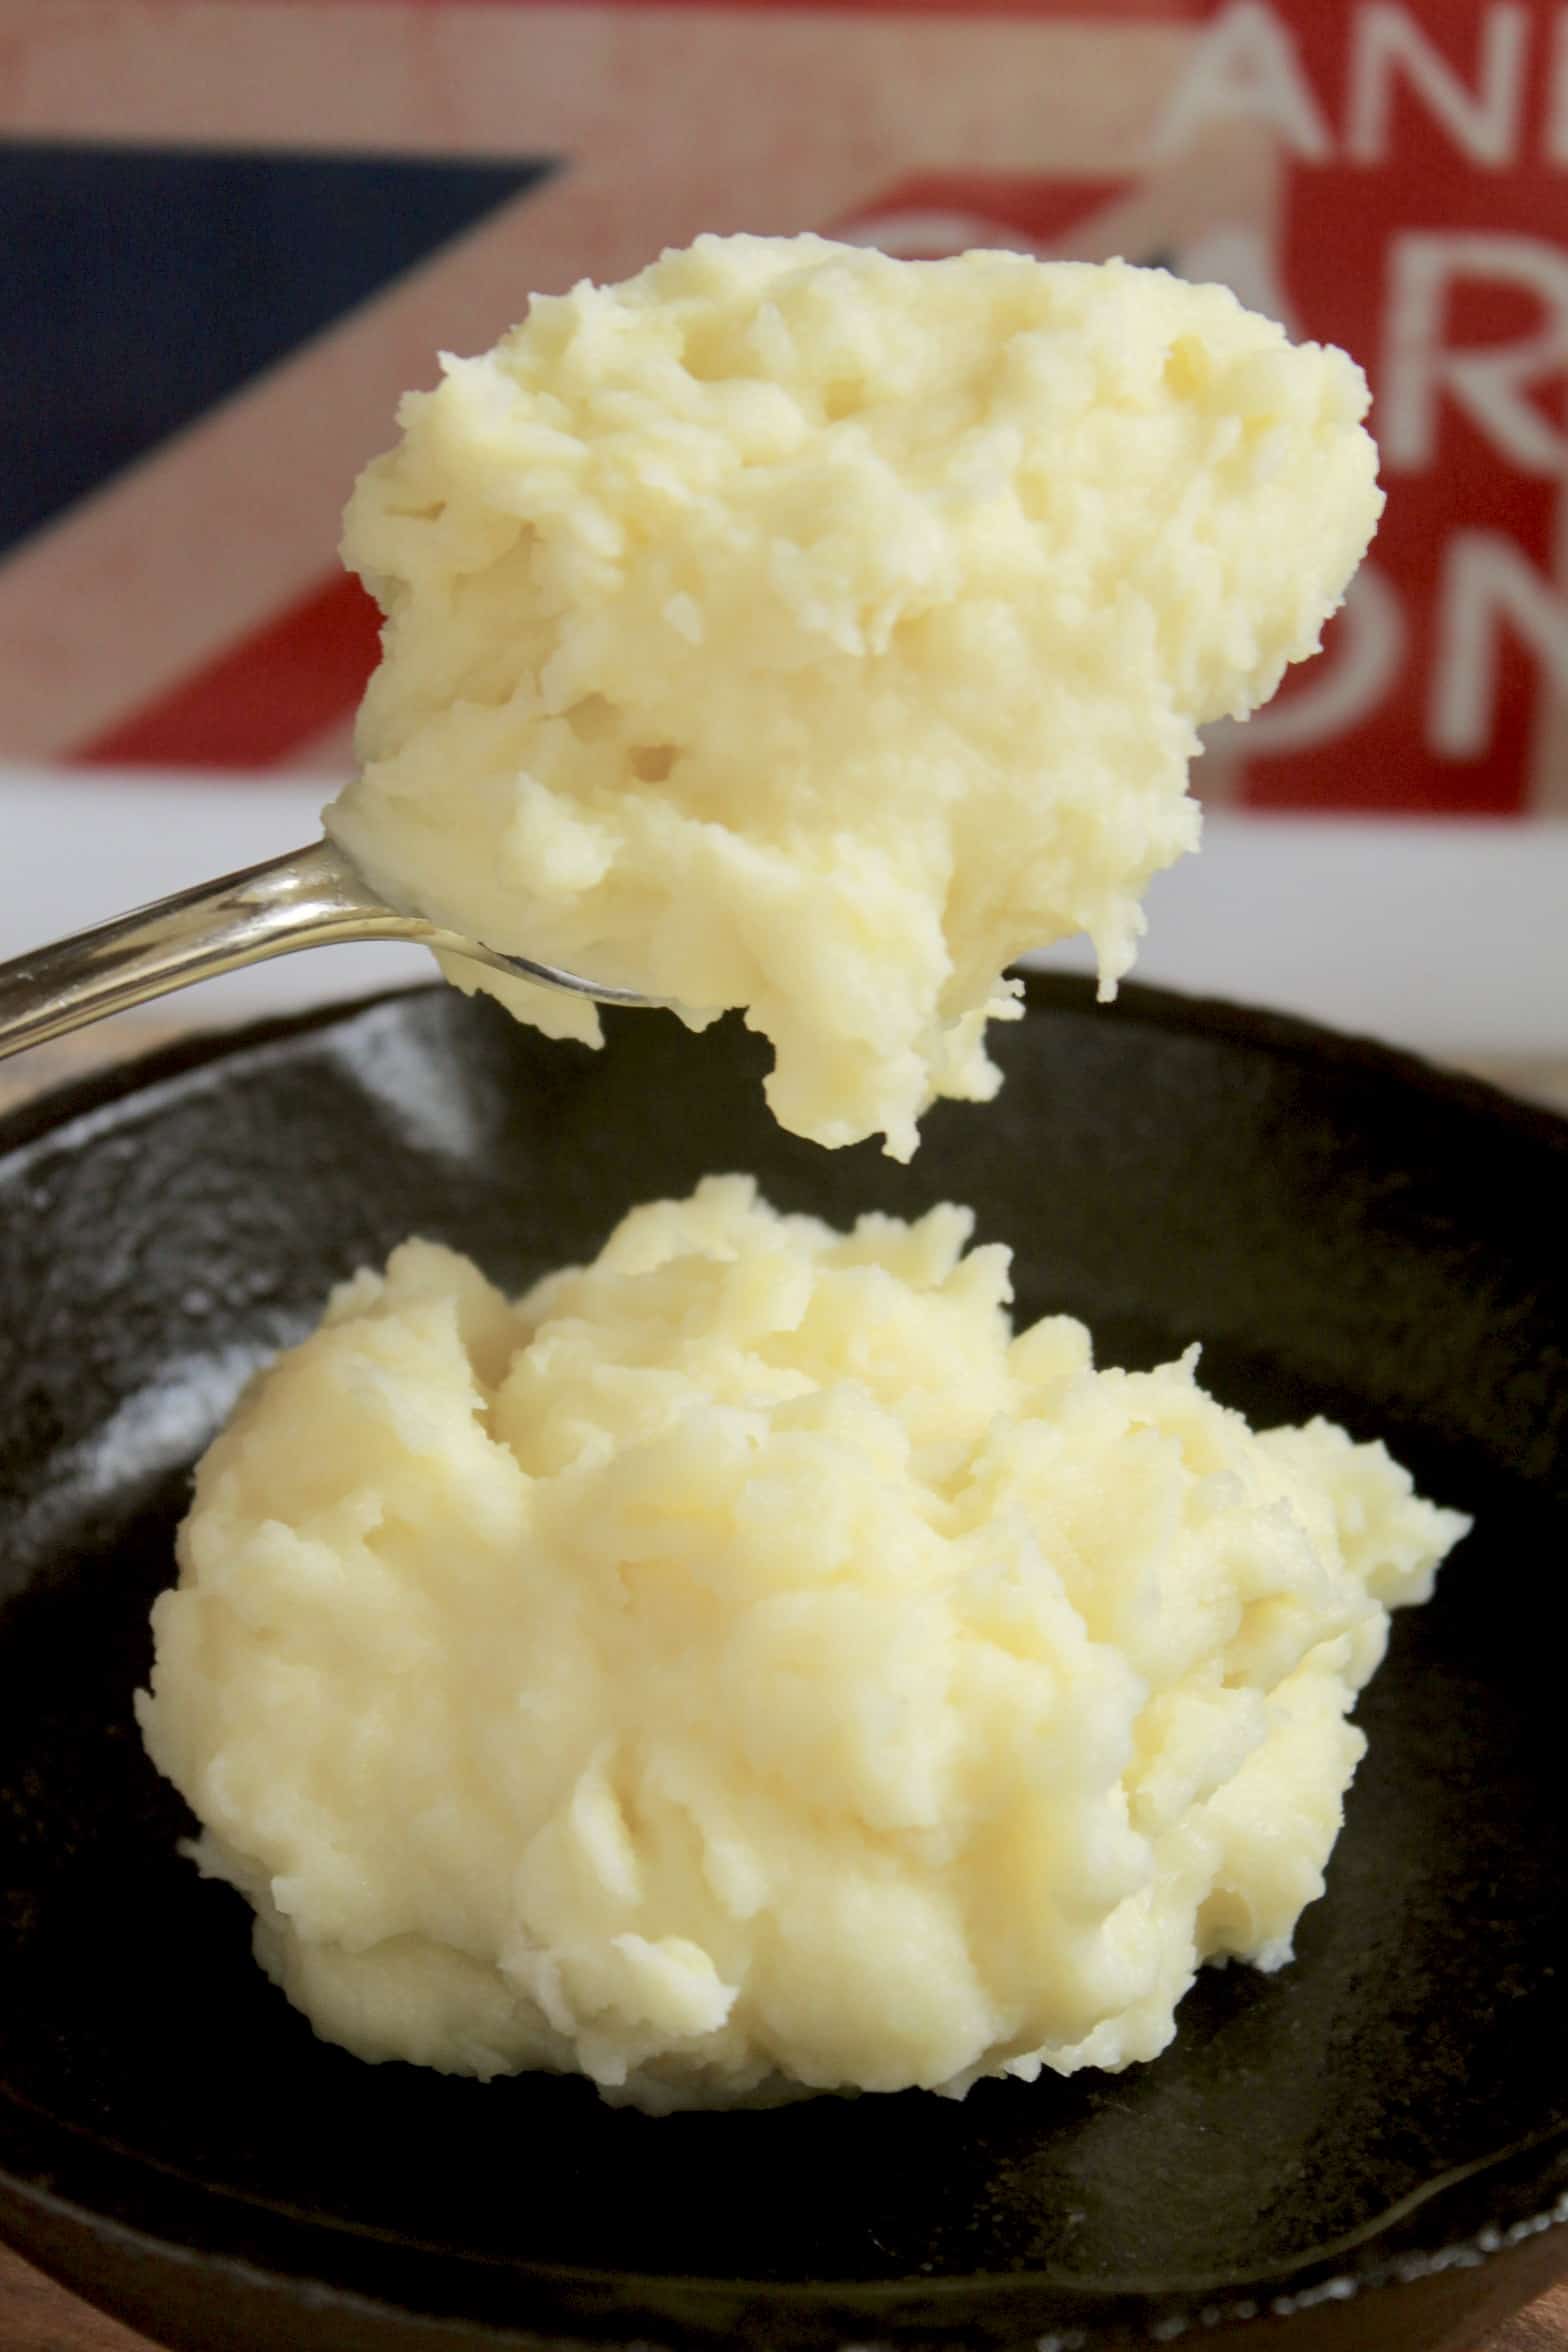 spooning out mashed potatoes